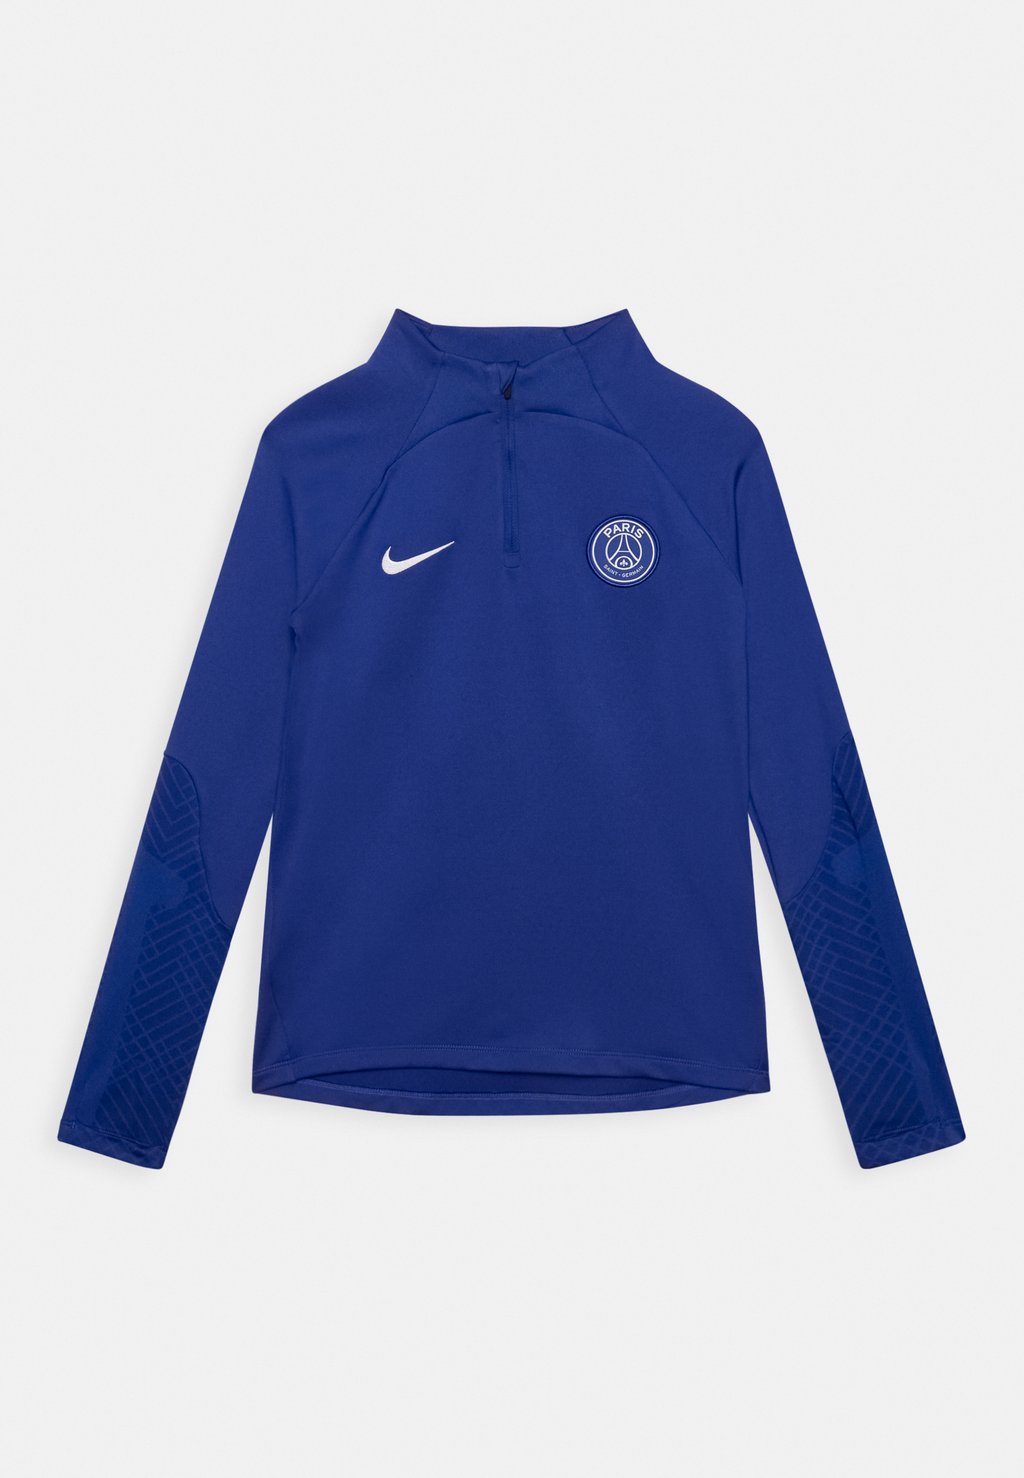 old Футболка Psg Ynk Dfstrk Drill Top Kkscl Nike, цвет old royal/old royal/old royal/white